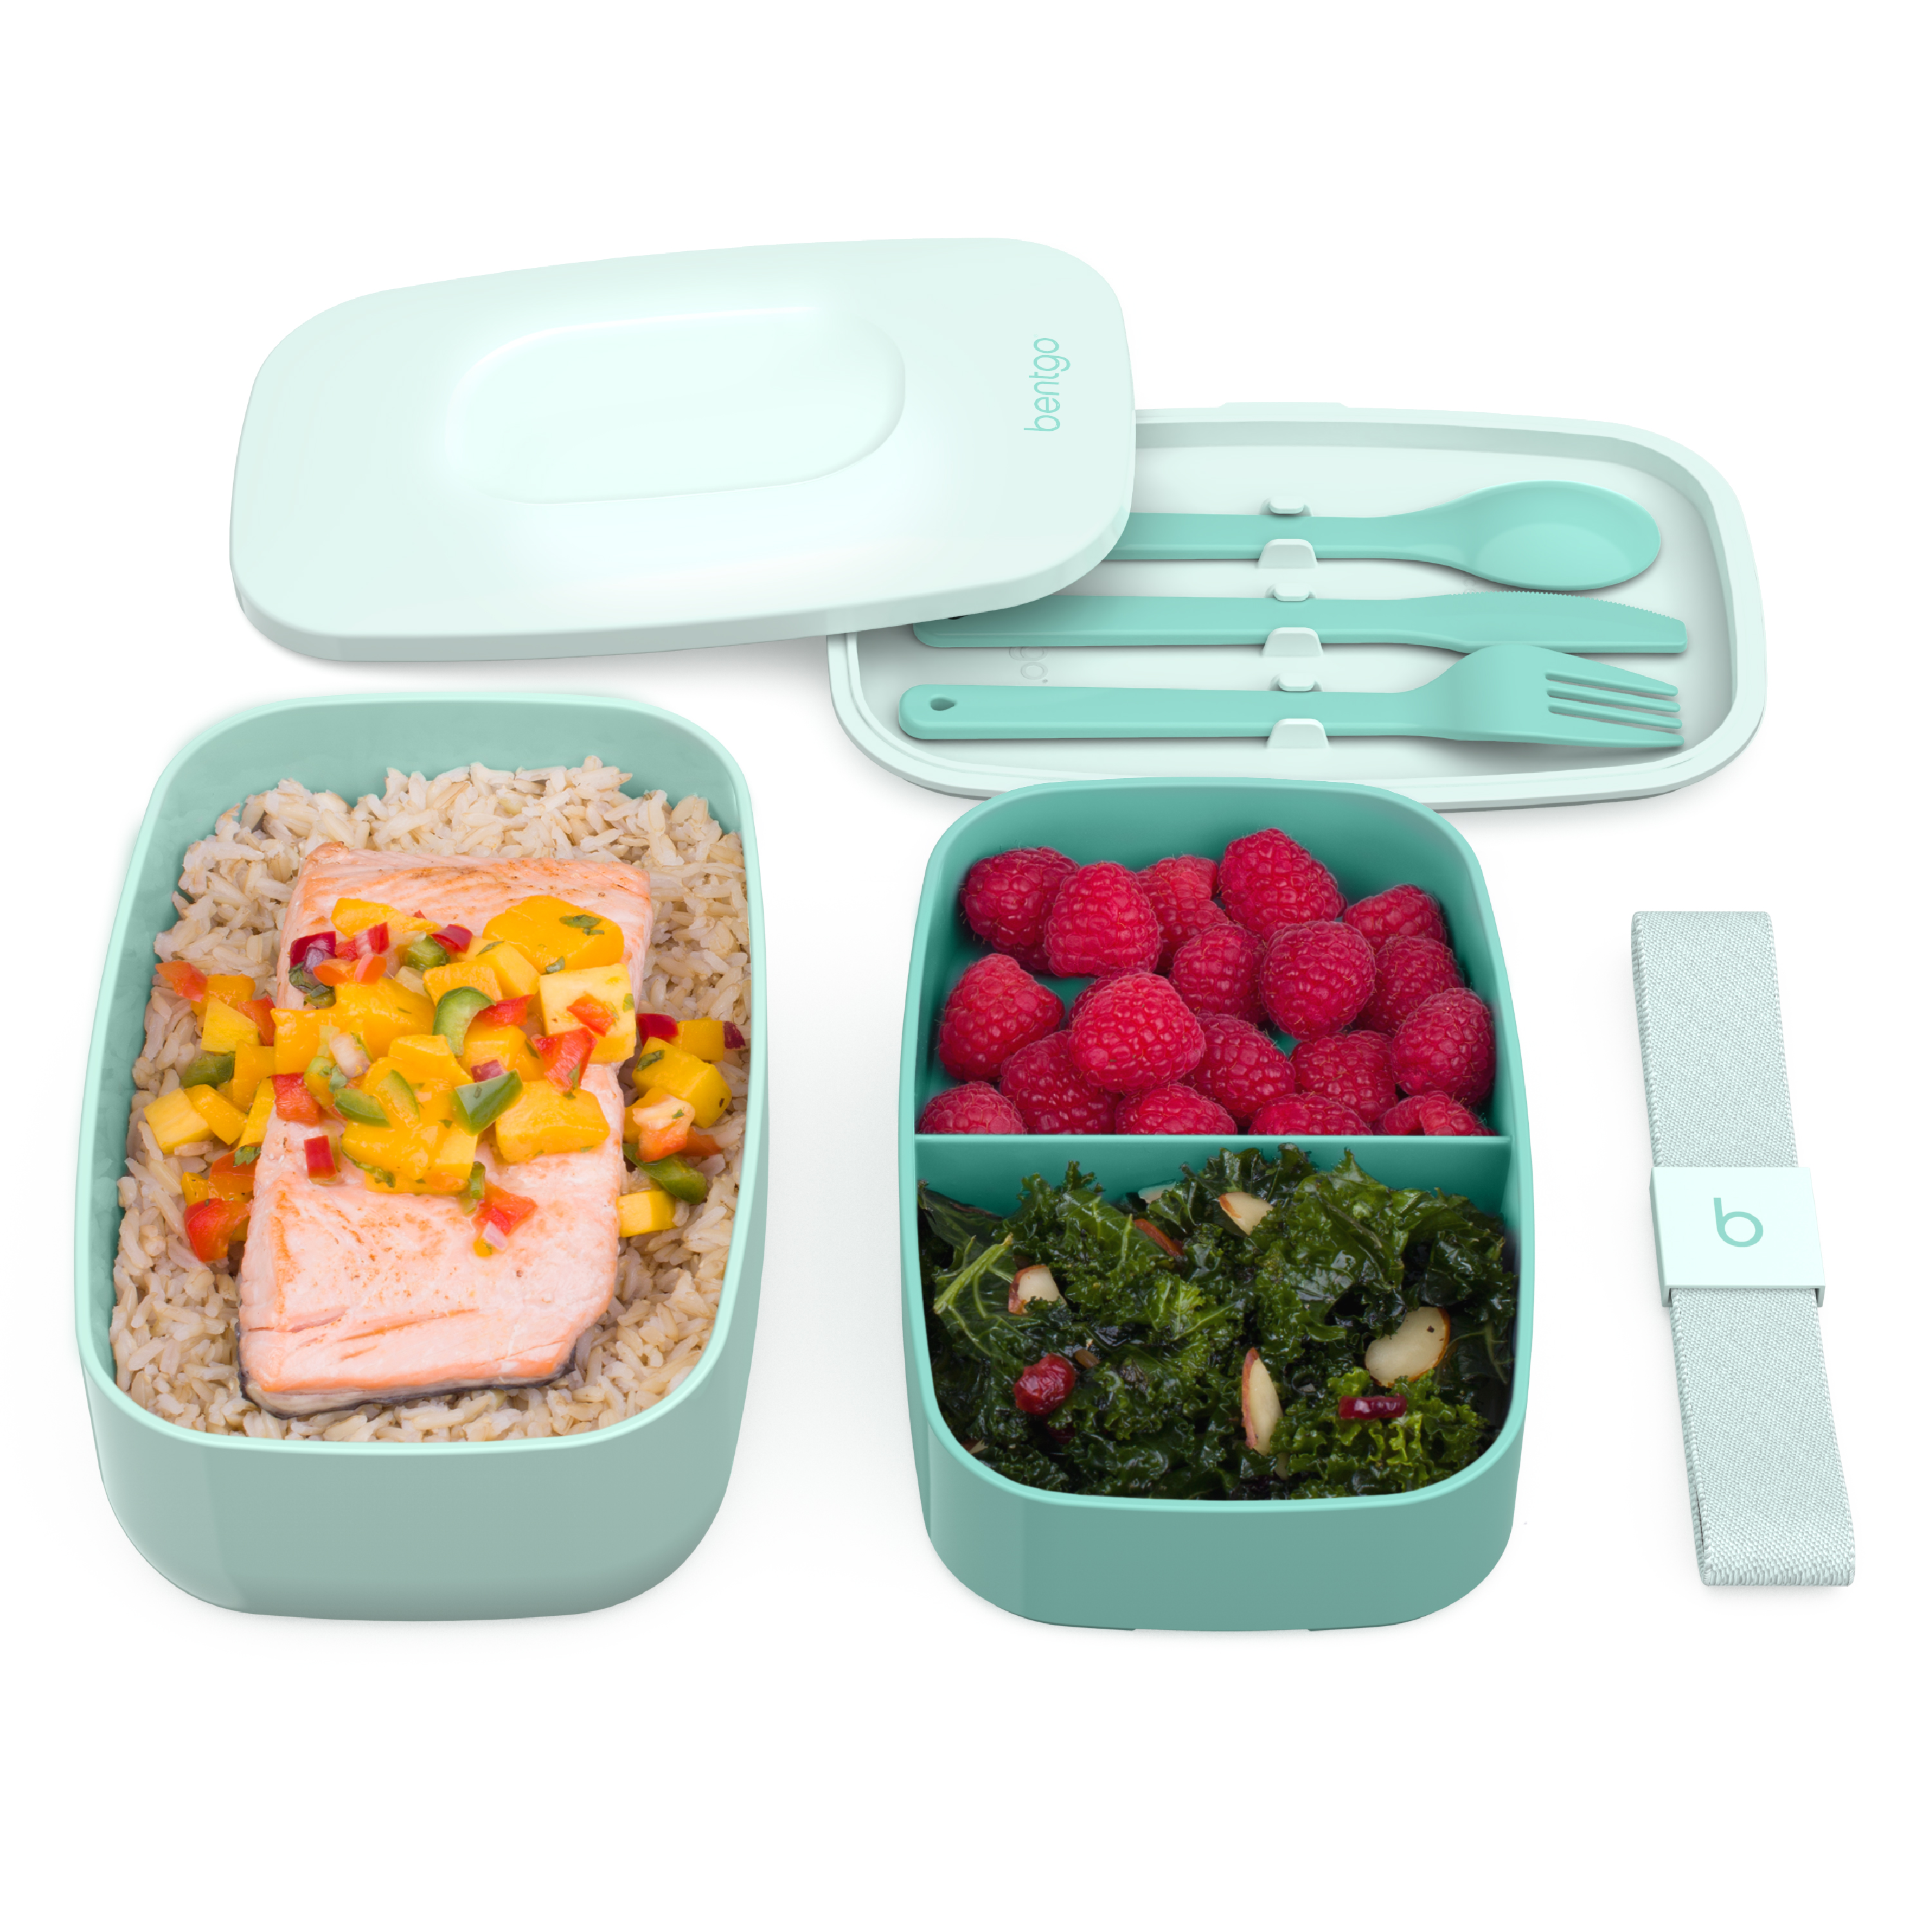 Bentgo Classic - All-in-One Stackable Bento Lunch Box Container - Modern Bento-Style Design Includes 2 Stackable Containers, Built-in Plastic Utensil Set, and Nylon Sealing Strap (Coastal Aqua) - image 2 of 5